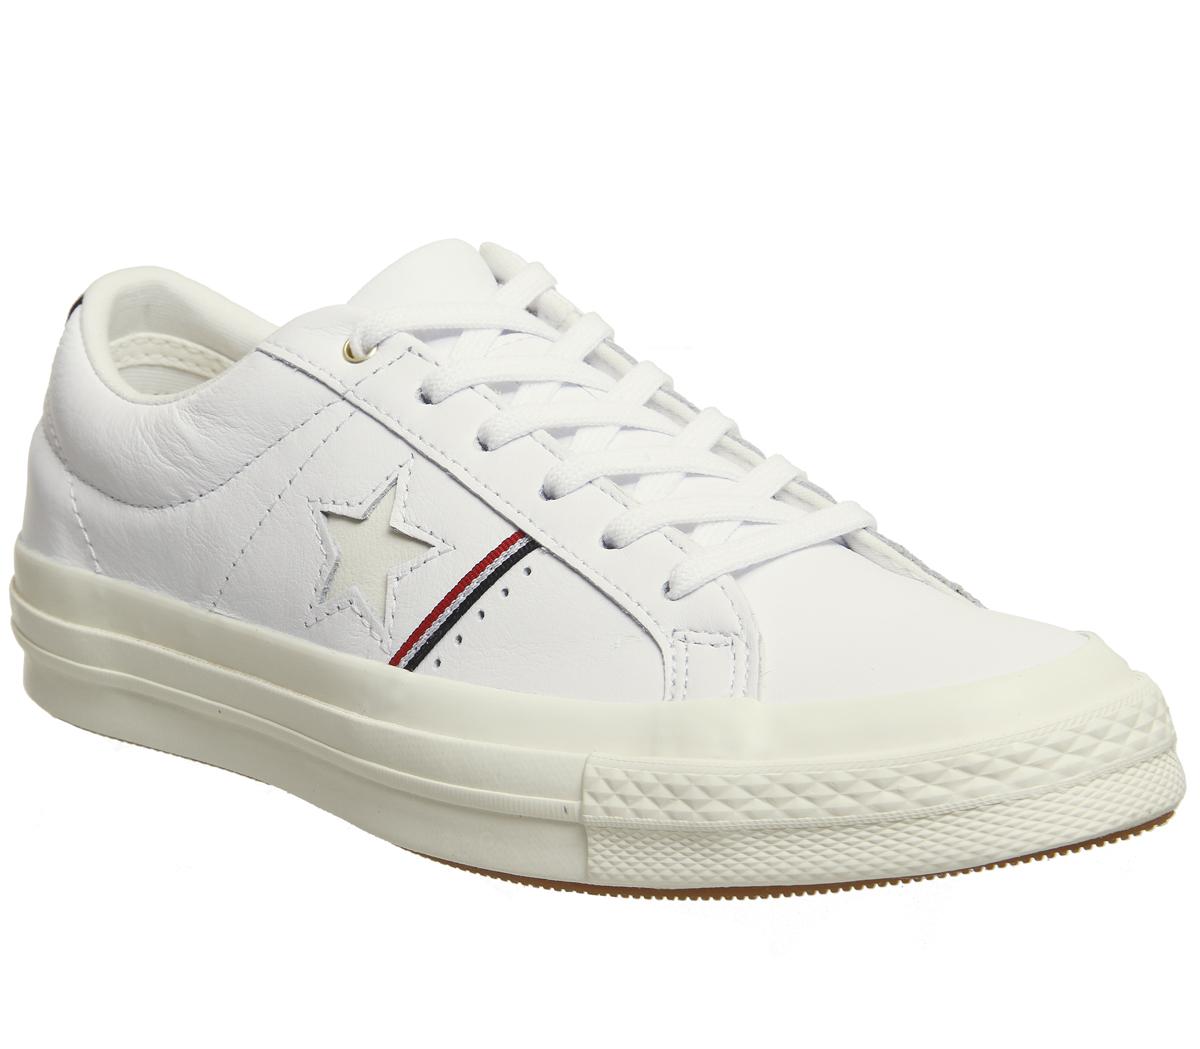 converse leather one star white